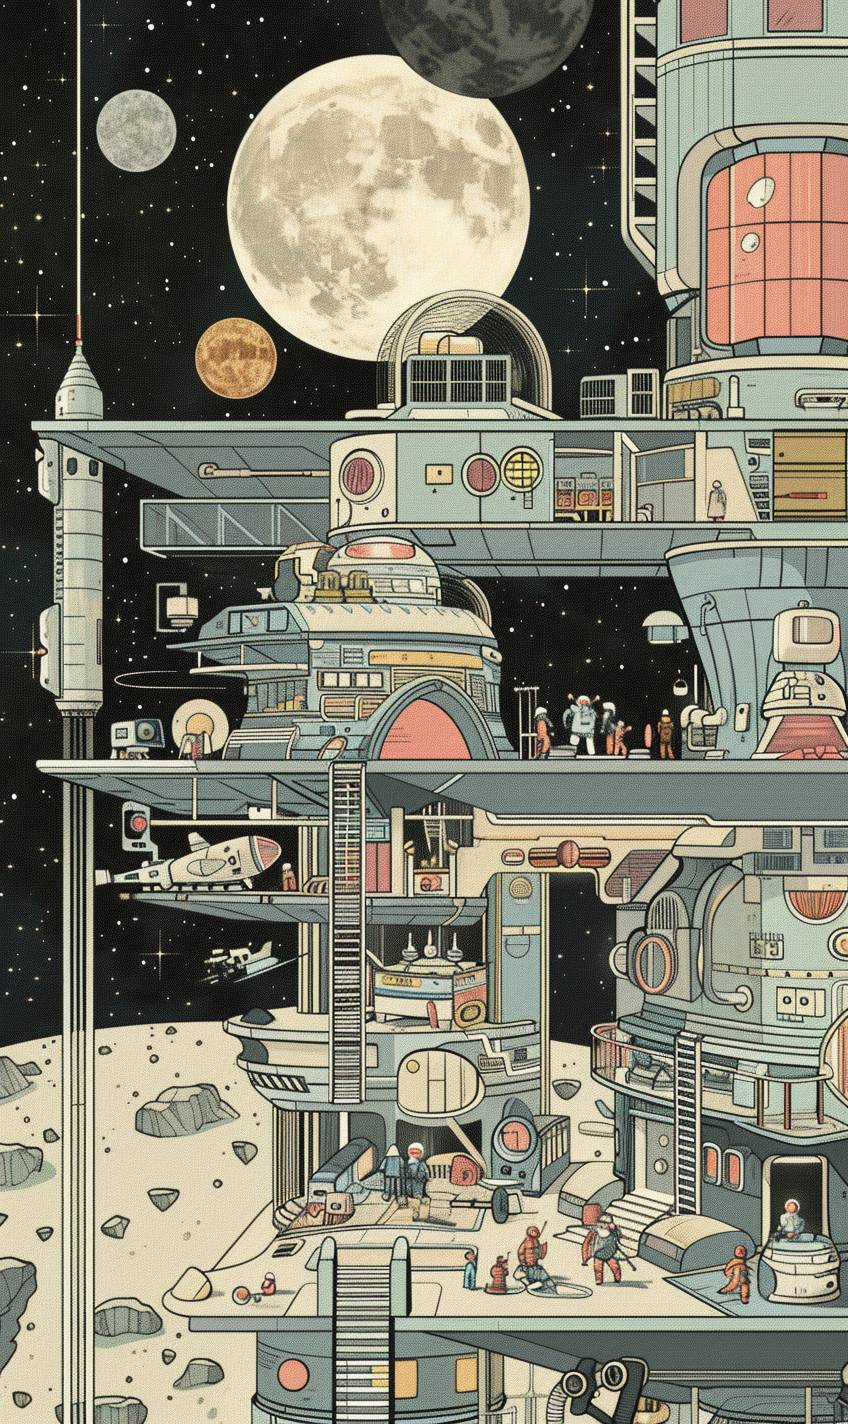 In the style of Chris Ware, a lunar colony with futuristic technology